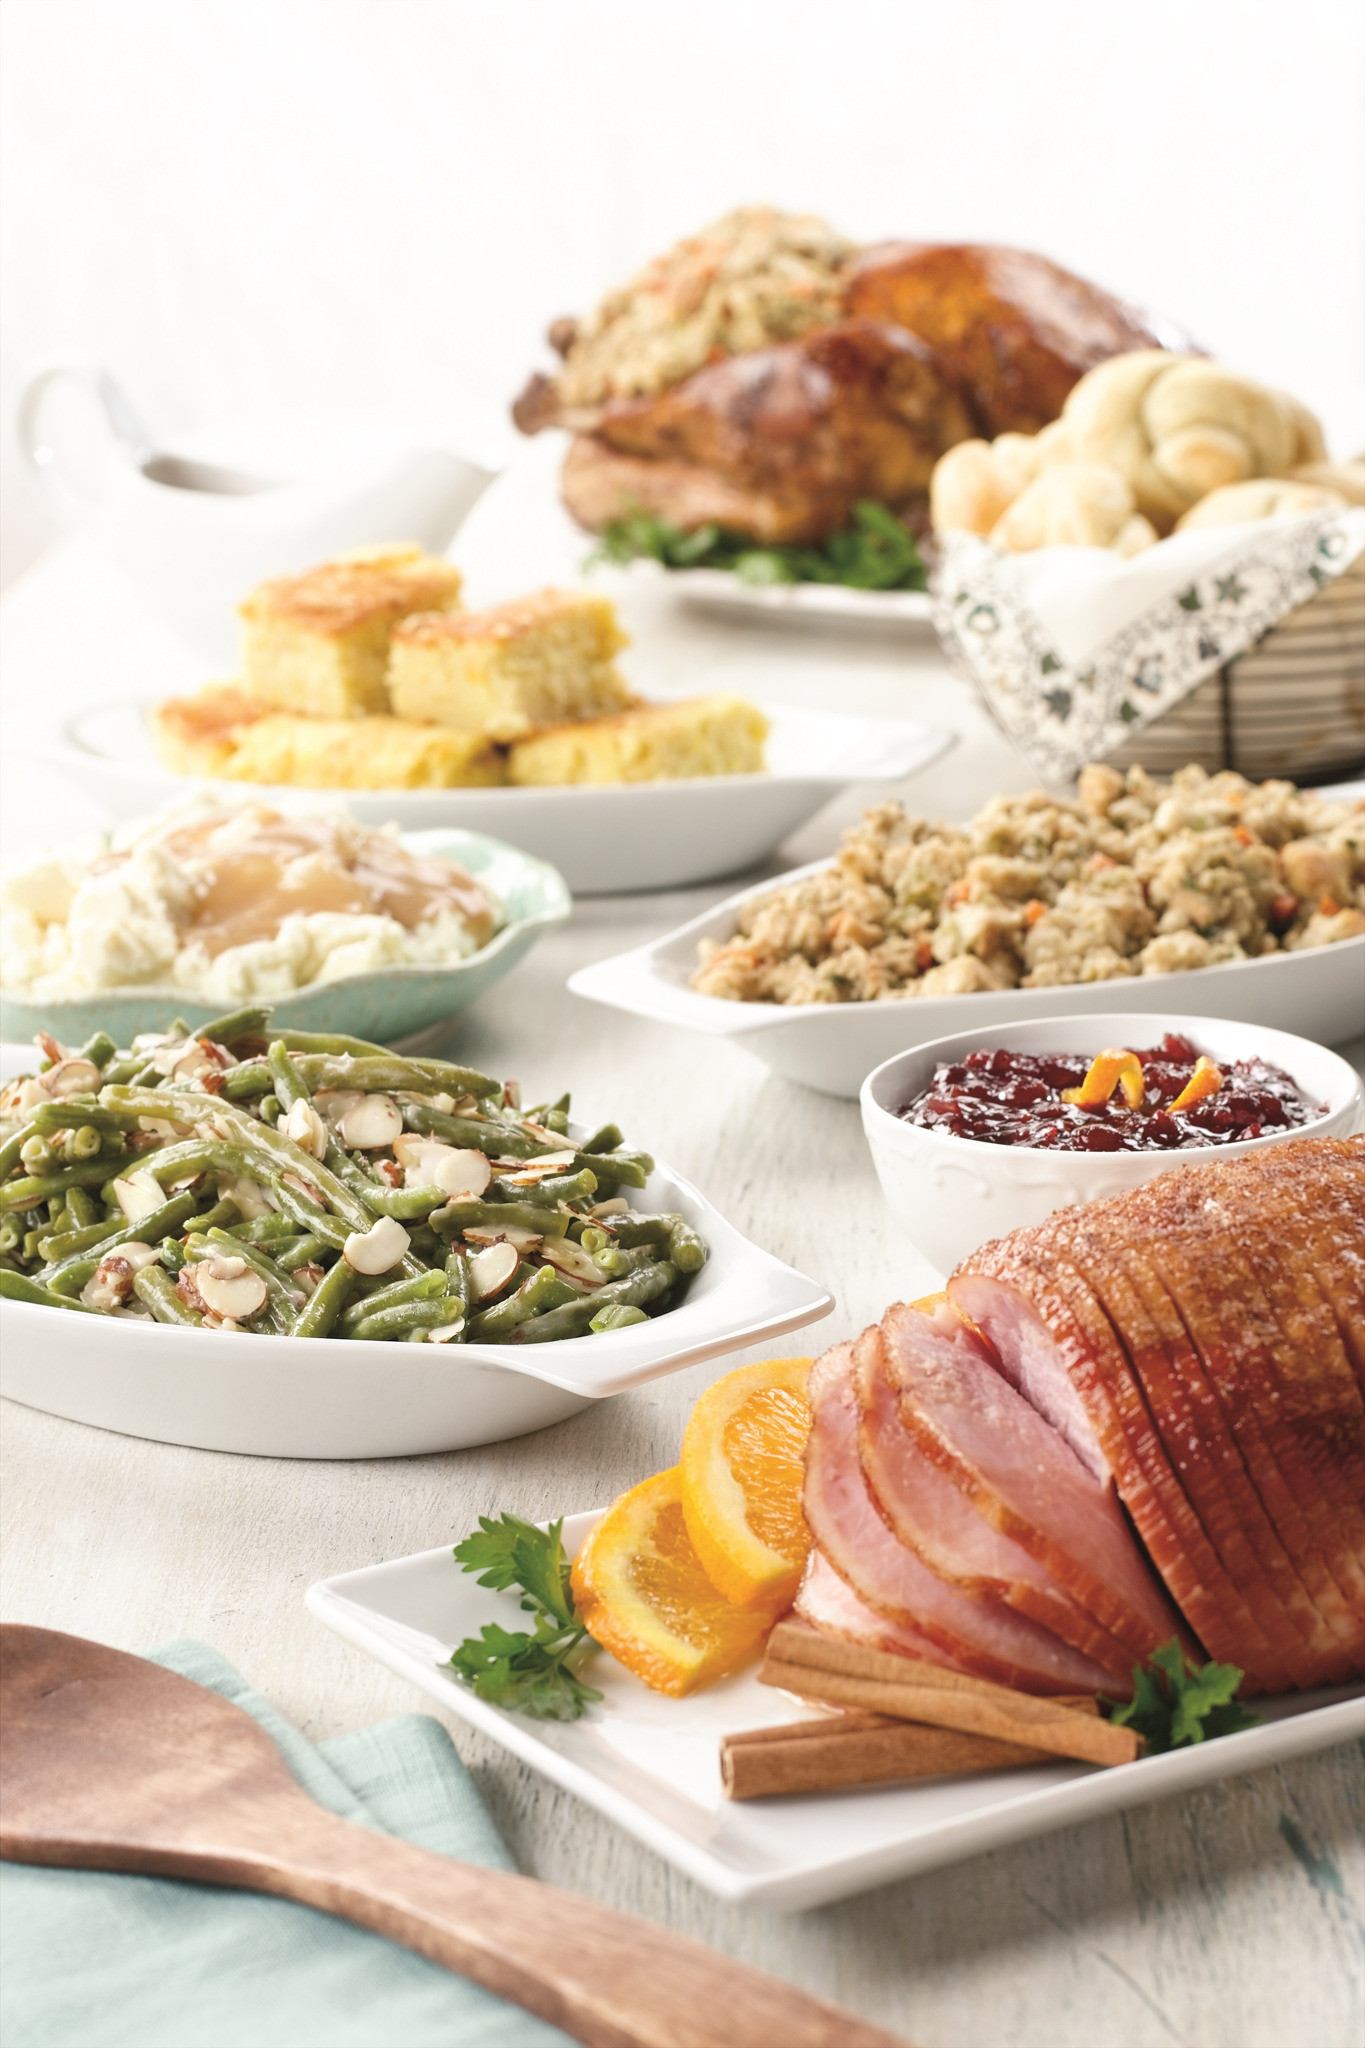 Fresh Market Thanksgiving Dinner
 The Fresh Market Provides Holiday Meal Options for an